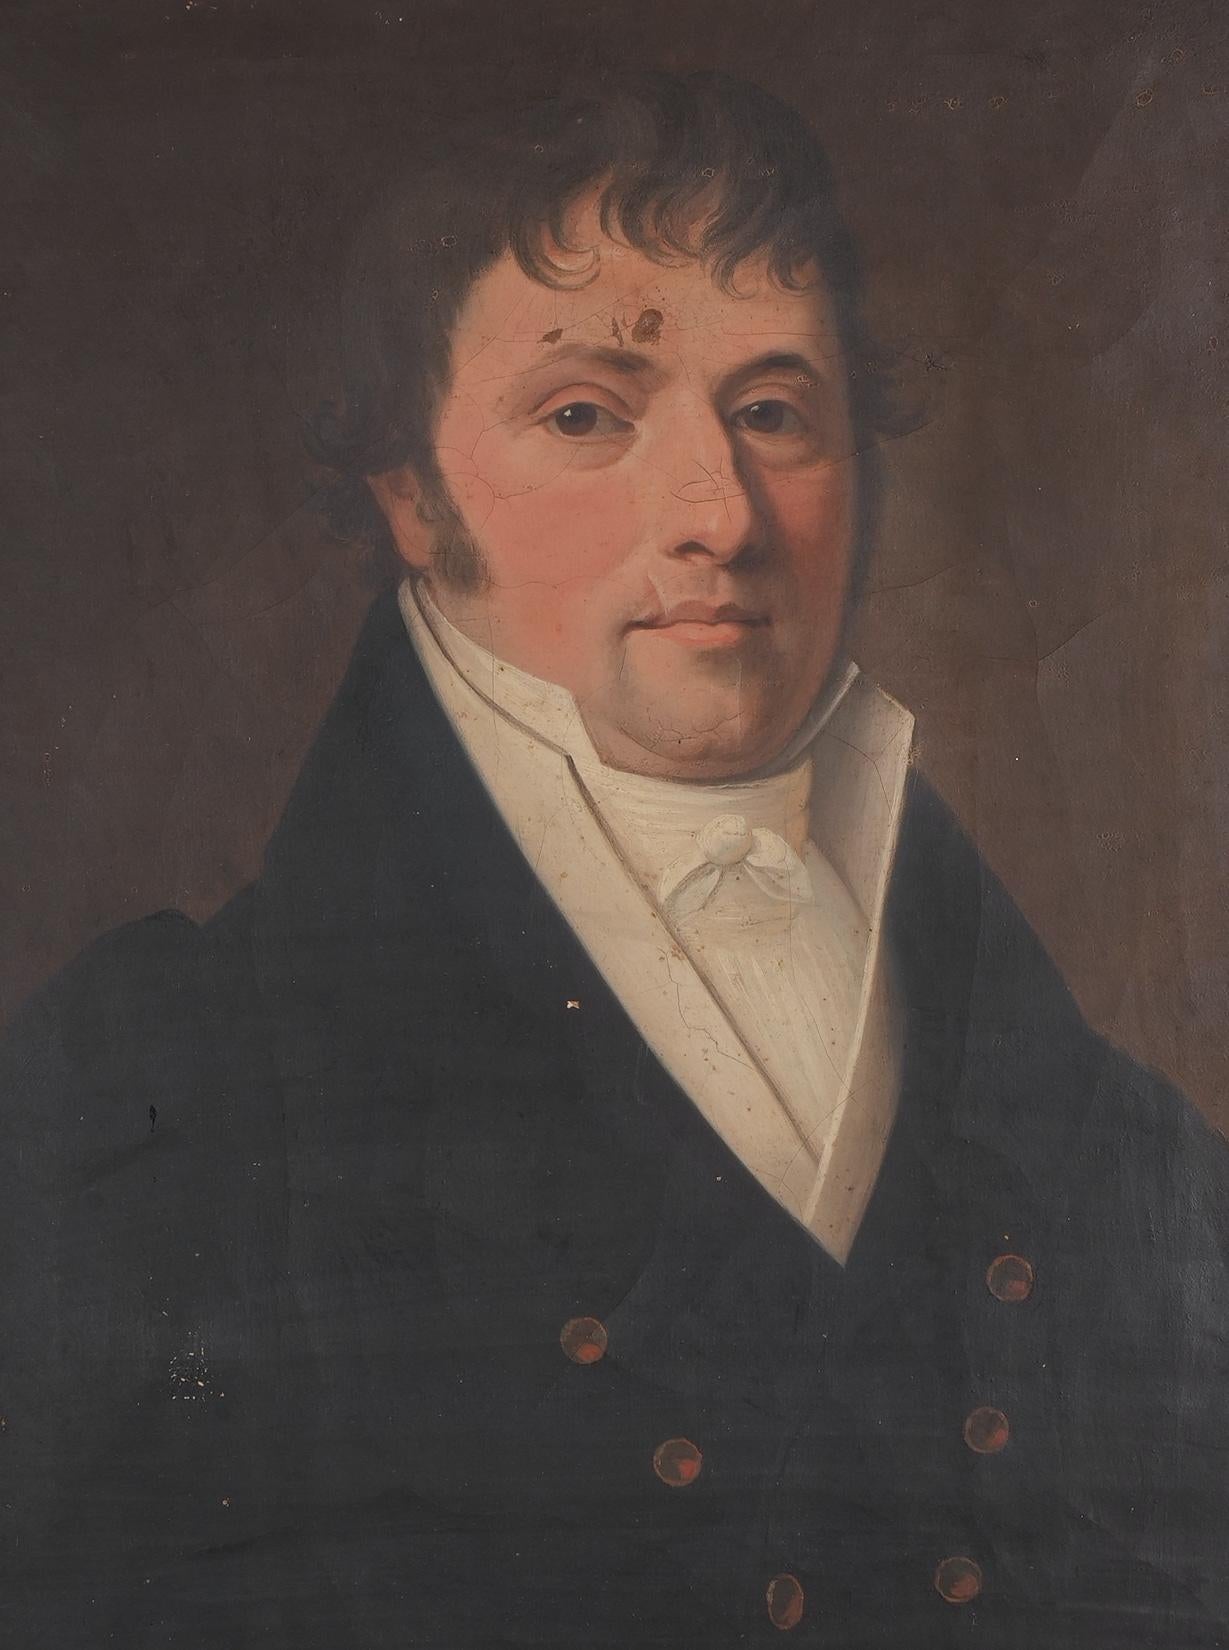 Bourbon Restoration portrait of French man. Dating from c. 1825, this handsome oil on canvas painting depicts a *homme bourgeois* displaying all the earmarks of the of the less-militaristic, more-business-minded style of the period following the